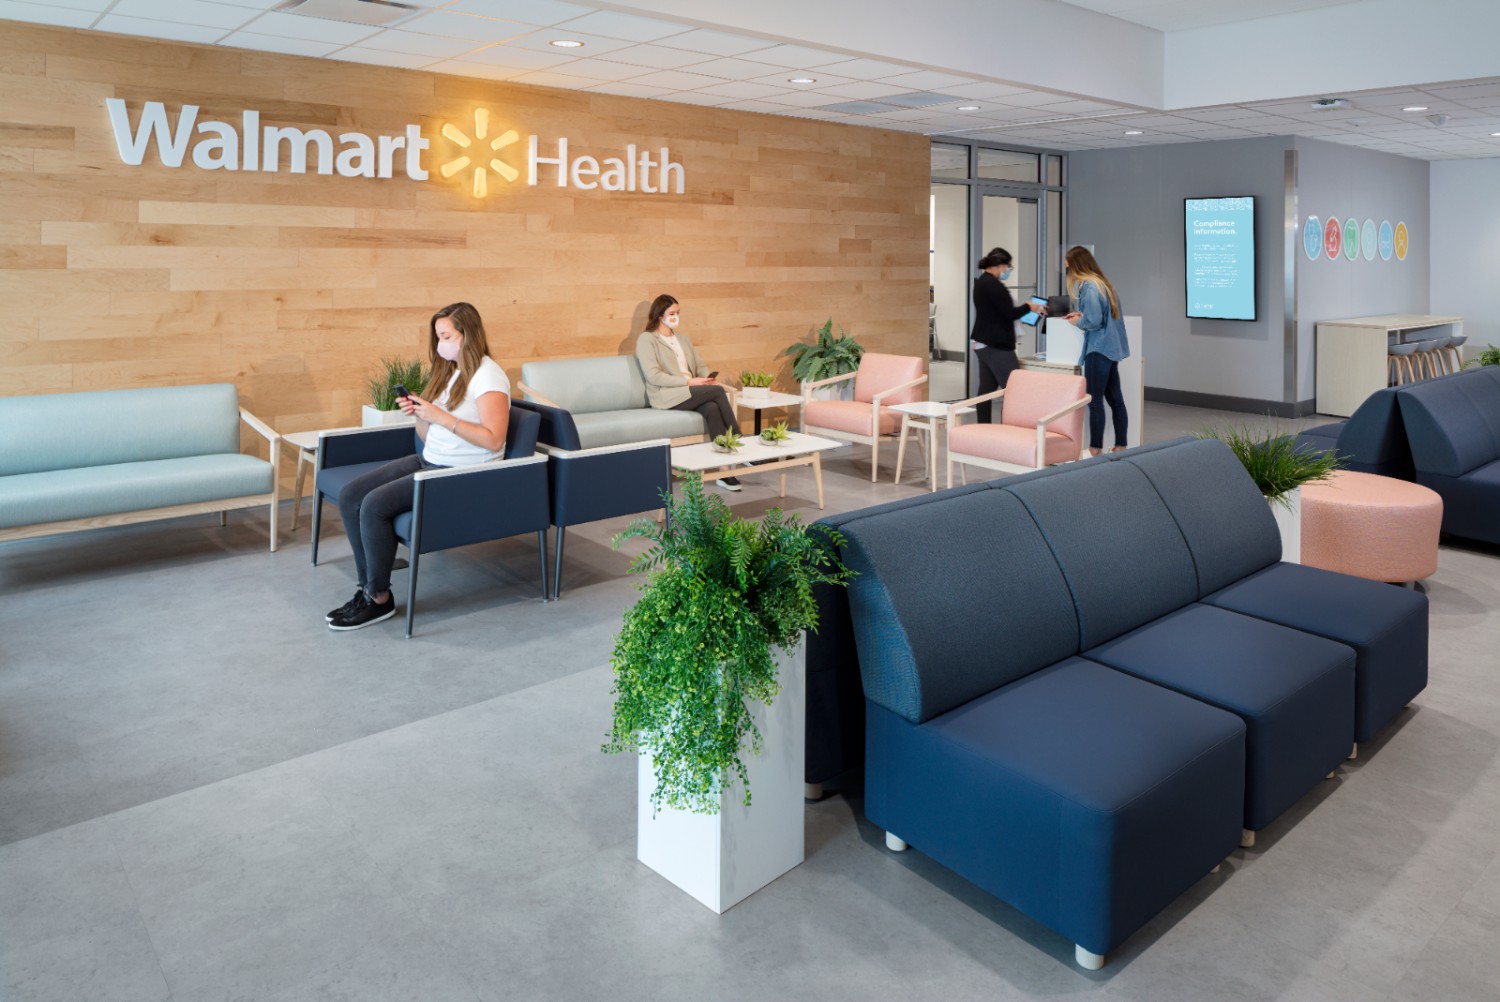 Digitally-Native Hims & Hers Health Adds Walmart To Its 10,000+